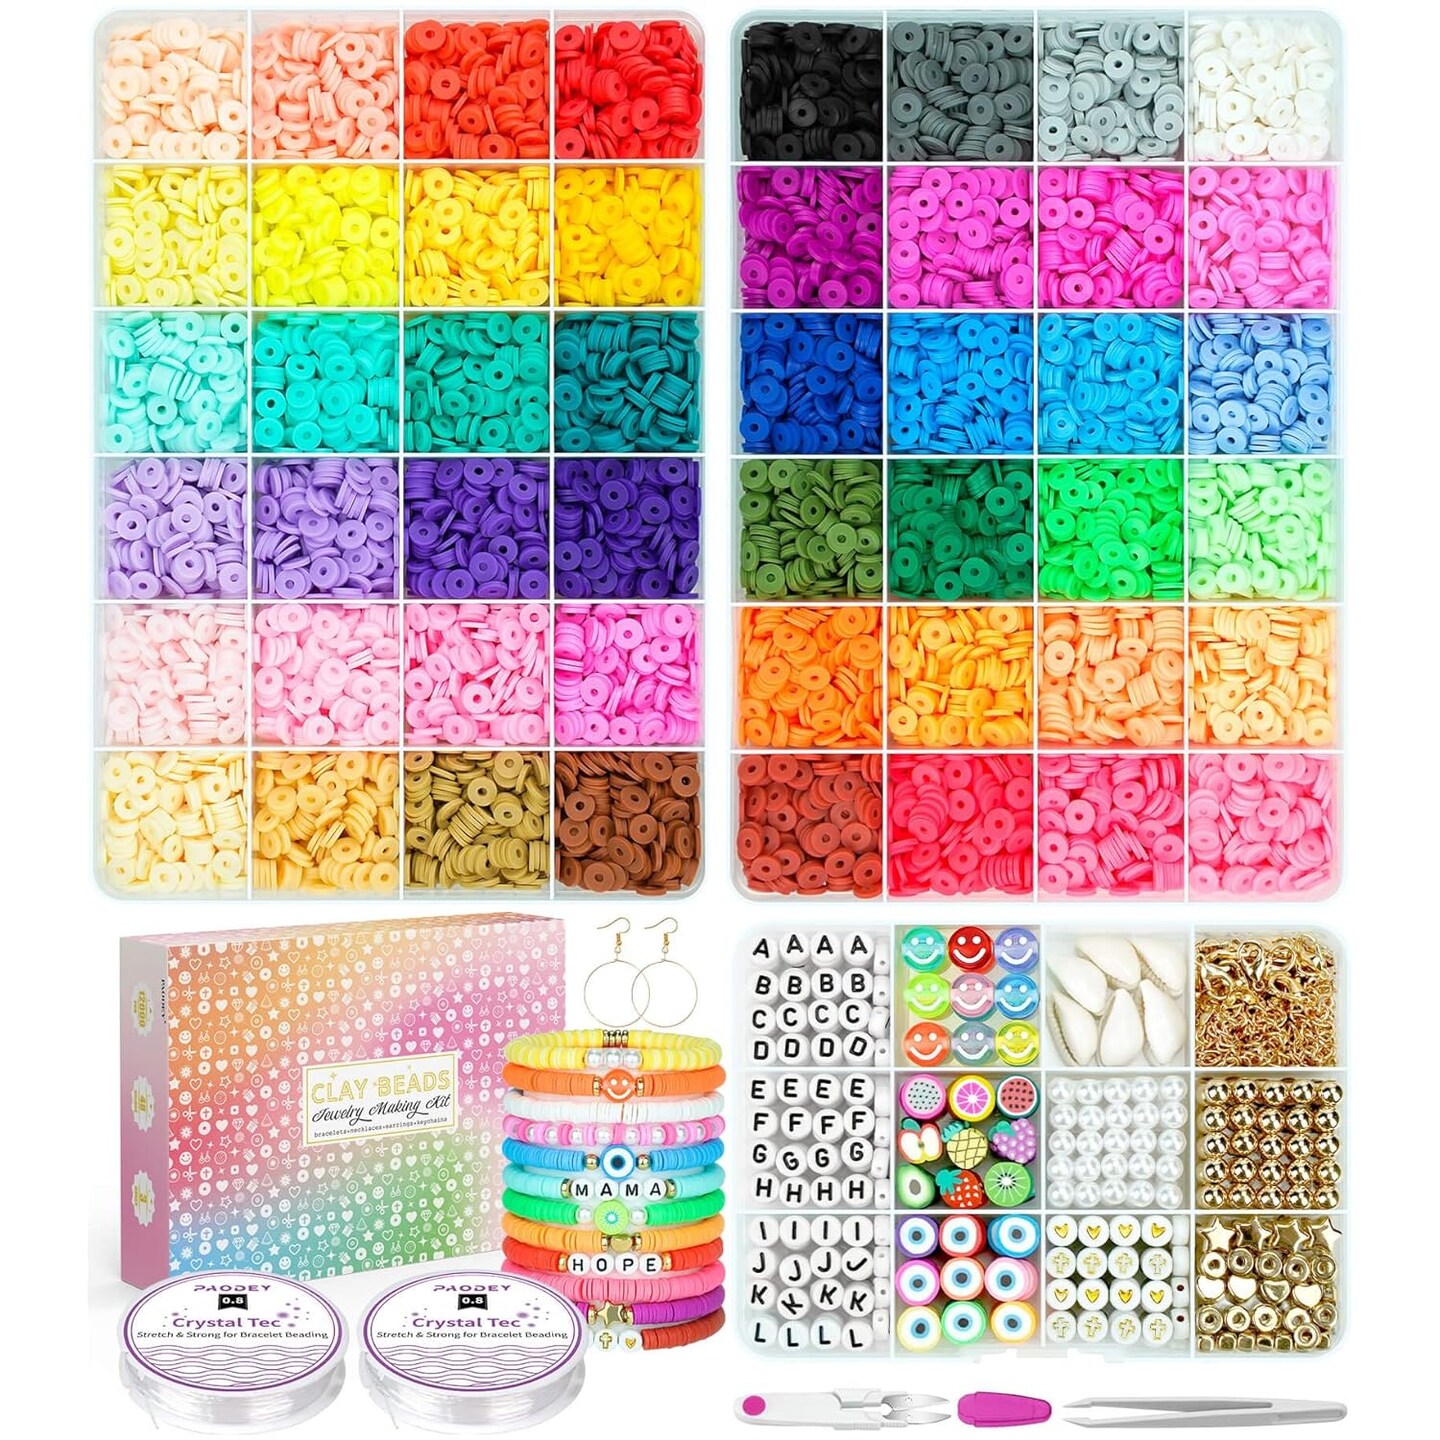 12000 Pcs Clay Beads For Bracelet Making, 48 Colors 3 Boxes, Jewelry Making Kit Polymer Spacer Preppy Heishi Beads And Elastic Strings, Crafts Gift For Ages 6-12